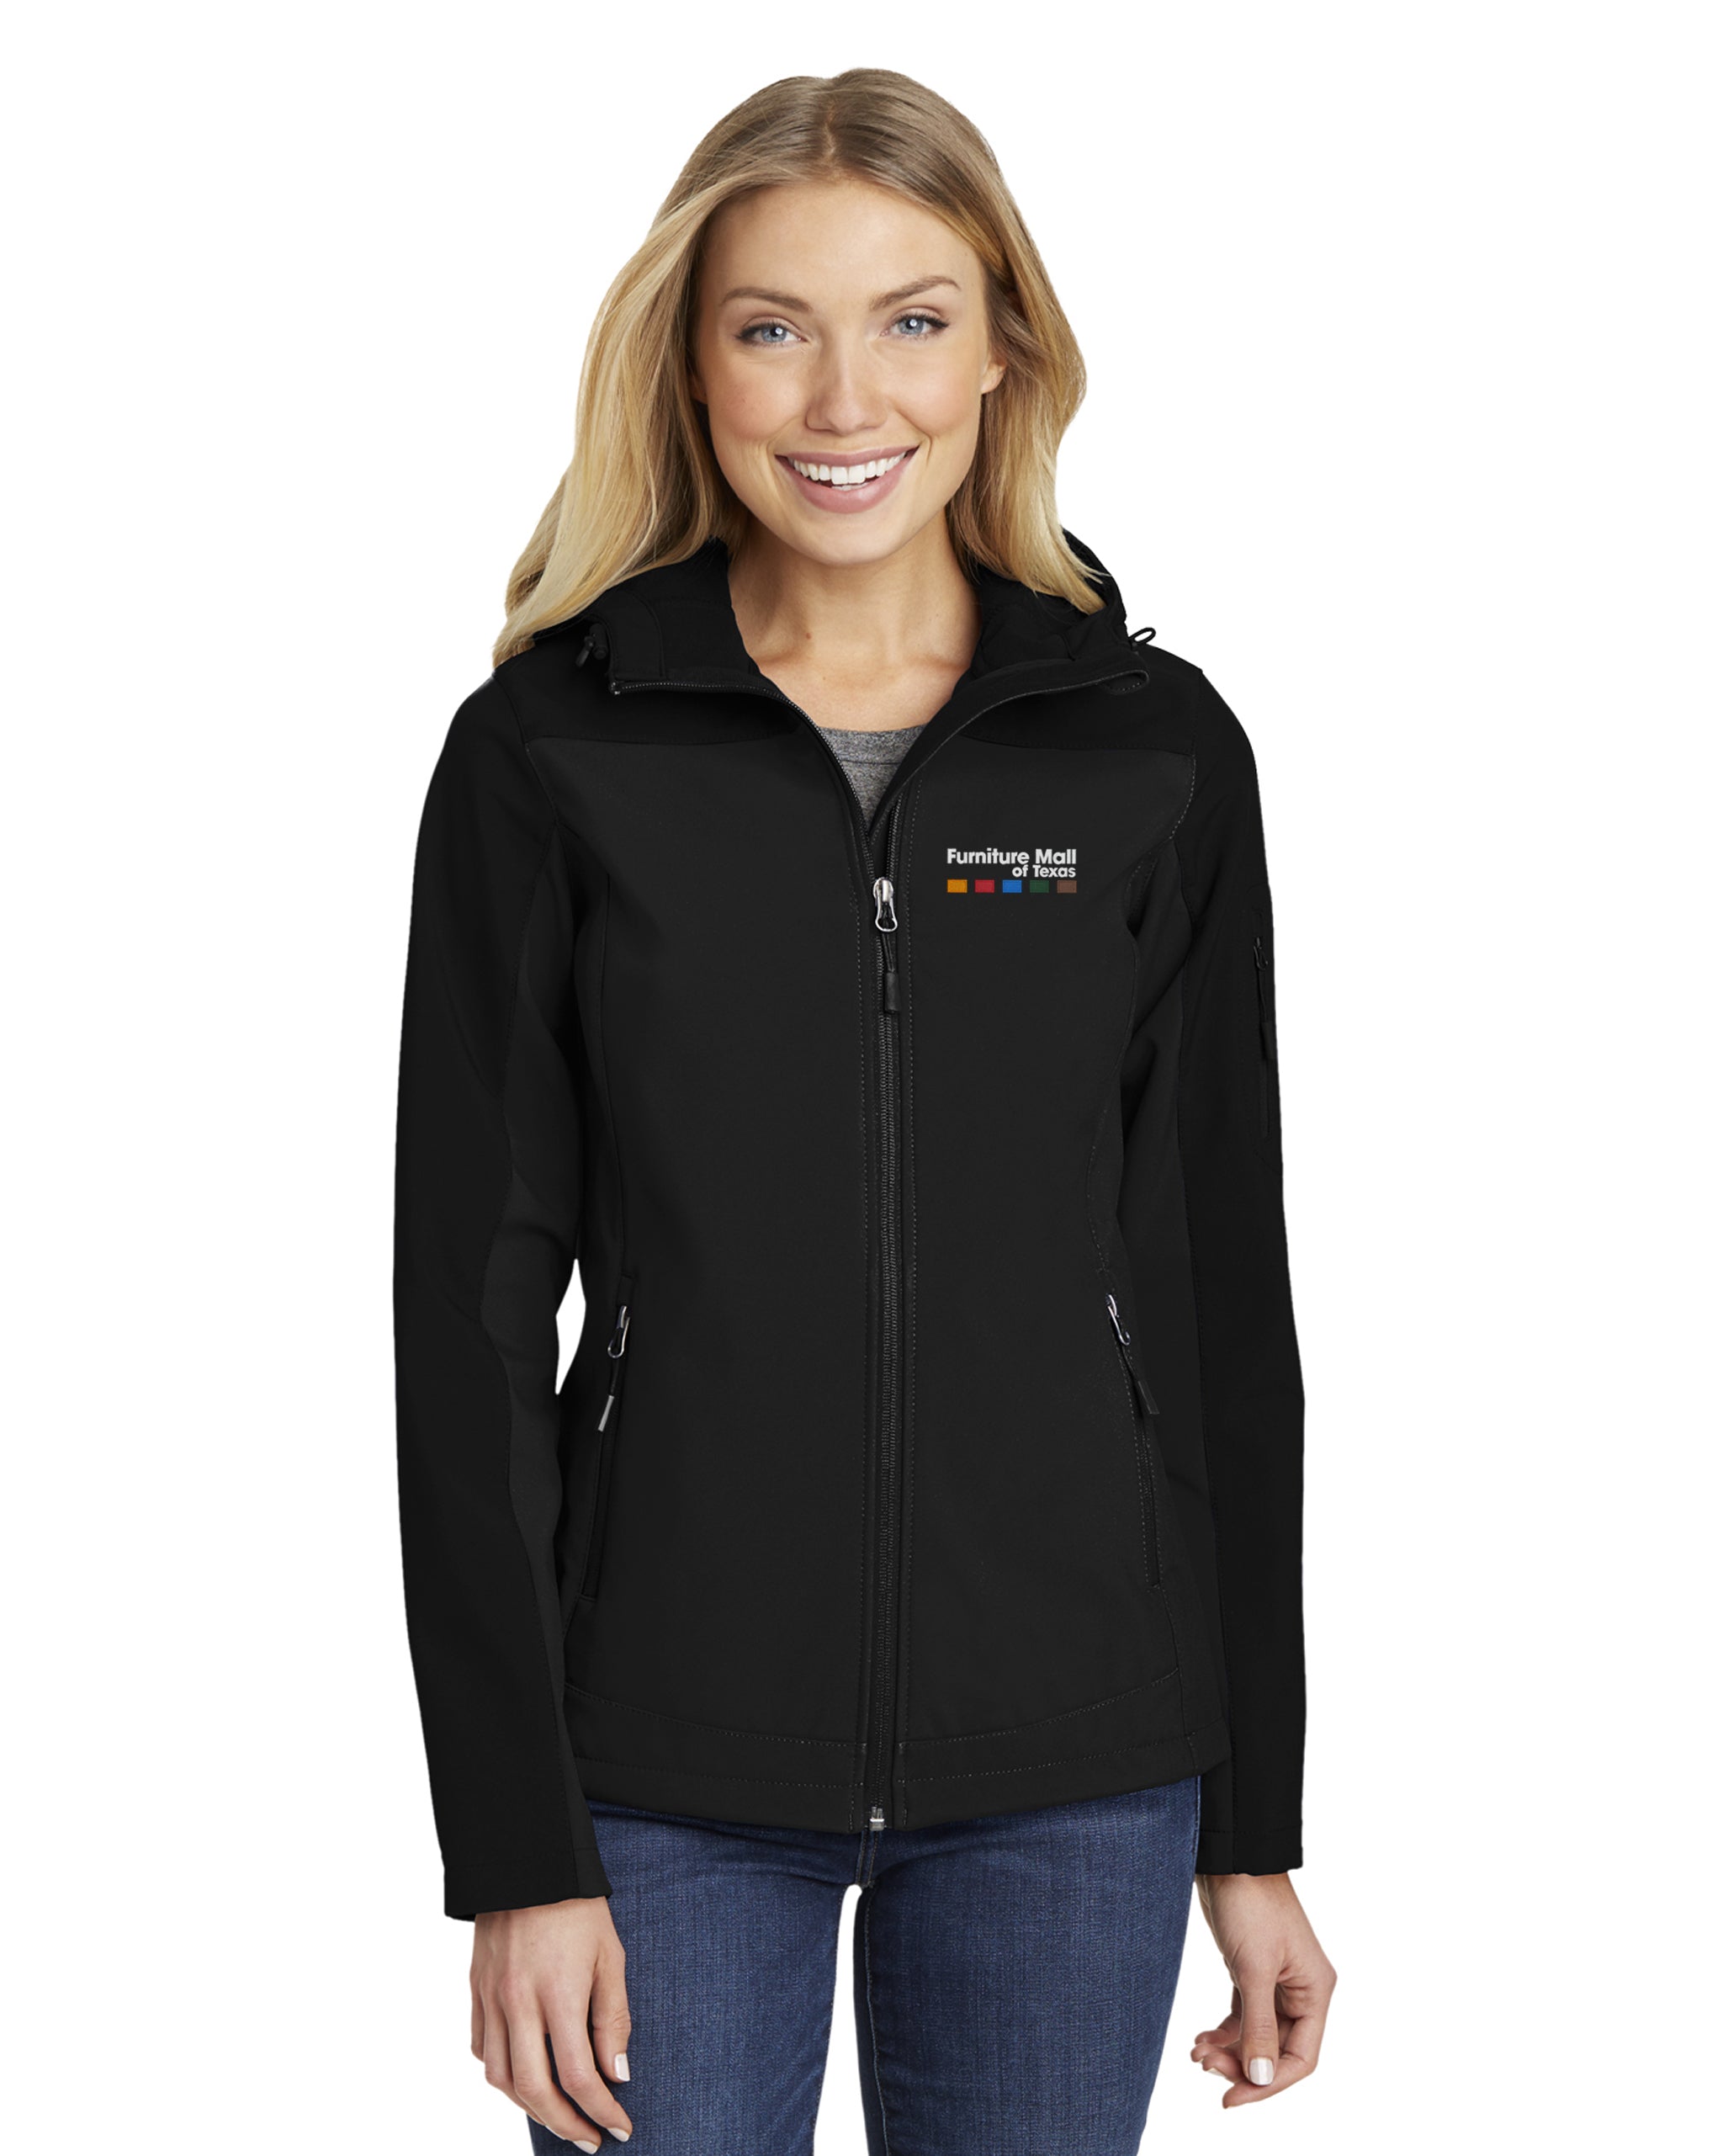 Furniture Mall of Texas - Port Authority Ladies Hooded Core Soft Shell Jacket - L335